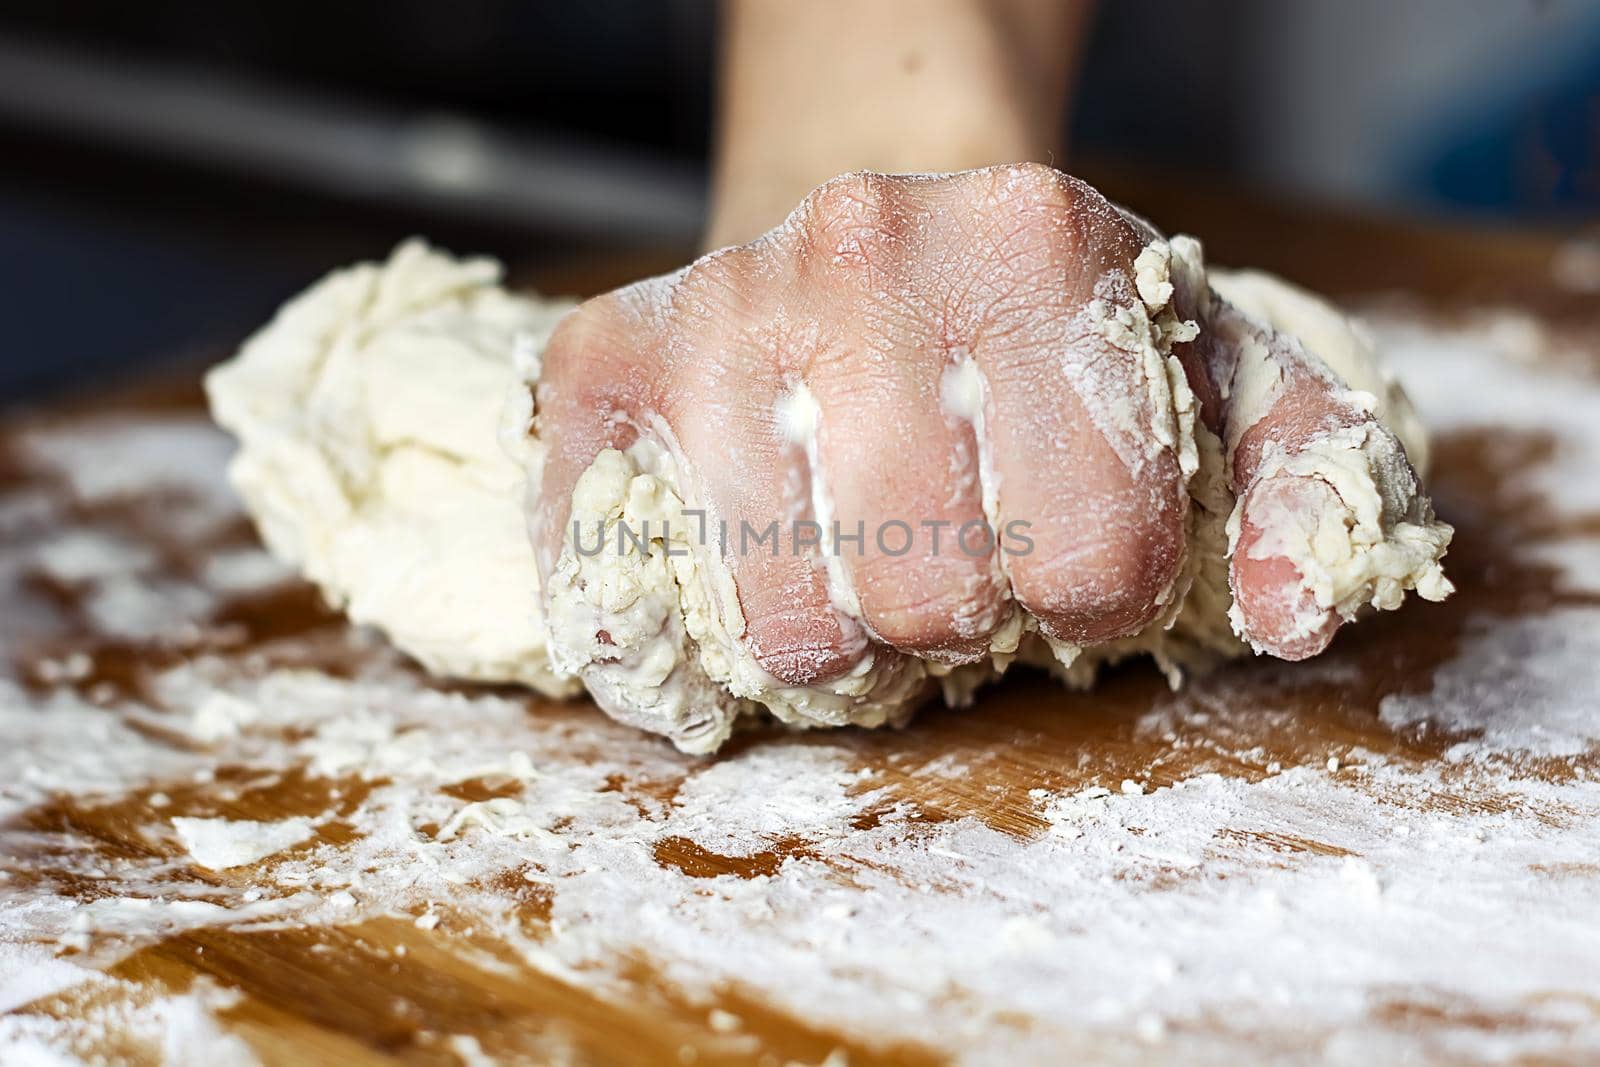 female hand kneading a flour dough by rolling it on a wooden board by rarrarorro